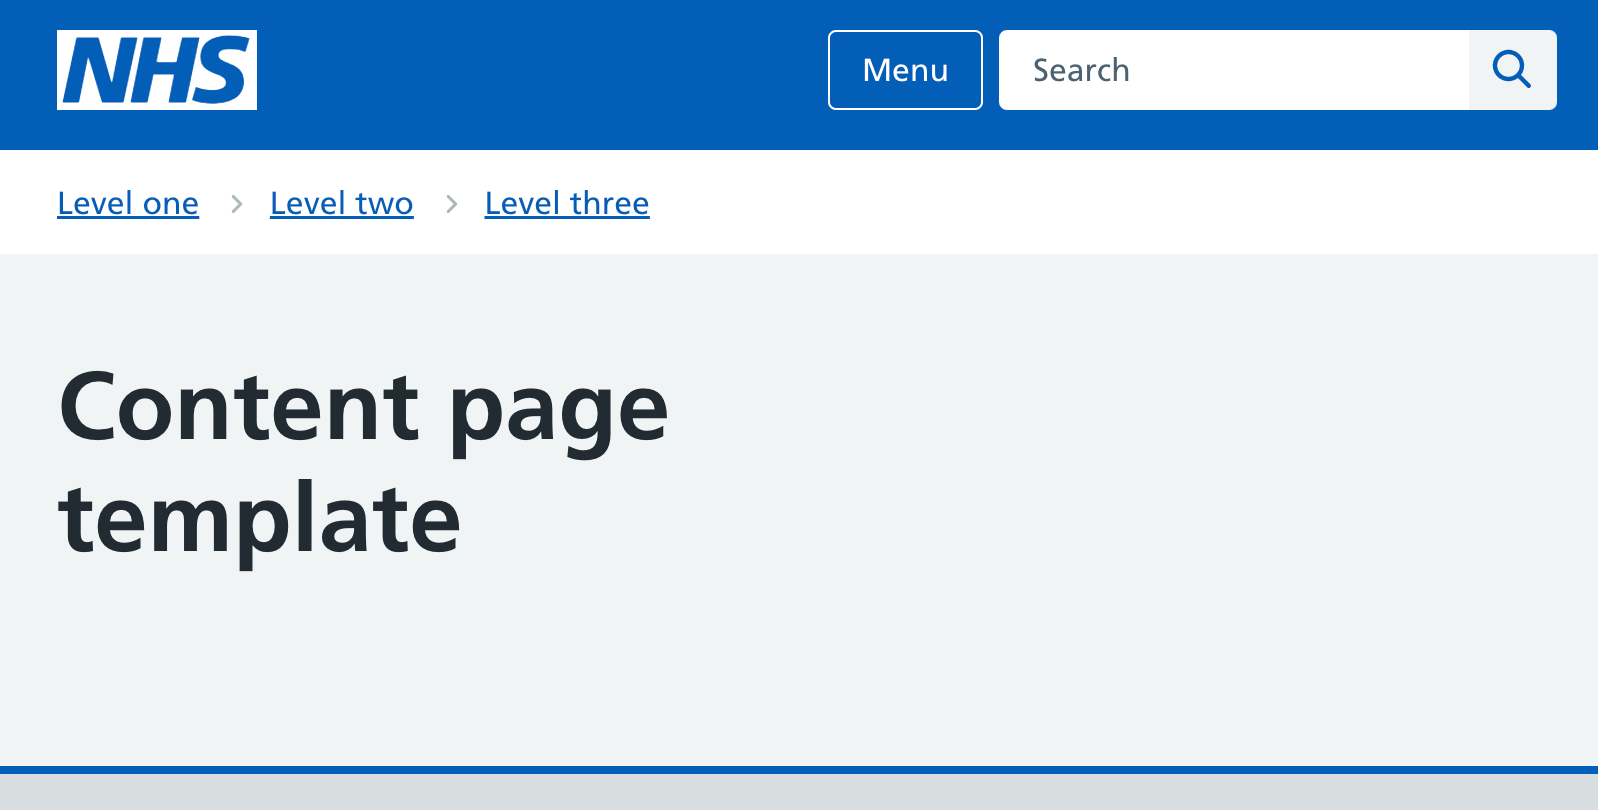 A screen grab from the NHS template for content page. The header contains the NHS logo, menu button and search bar. There are three example navigation breadcrumbs. The page itself says 'Content page template' in title style.